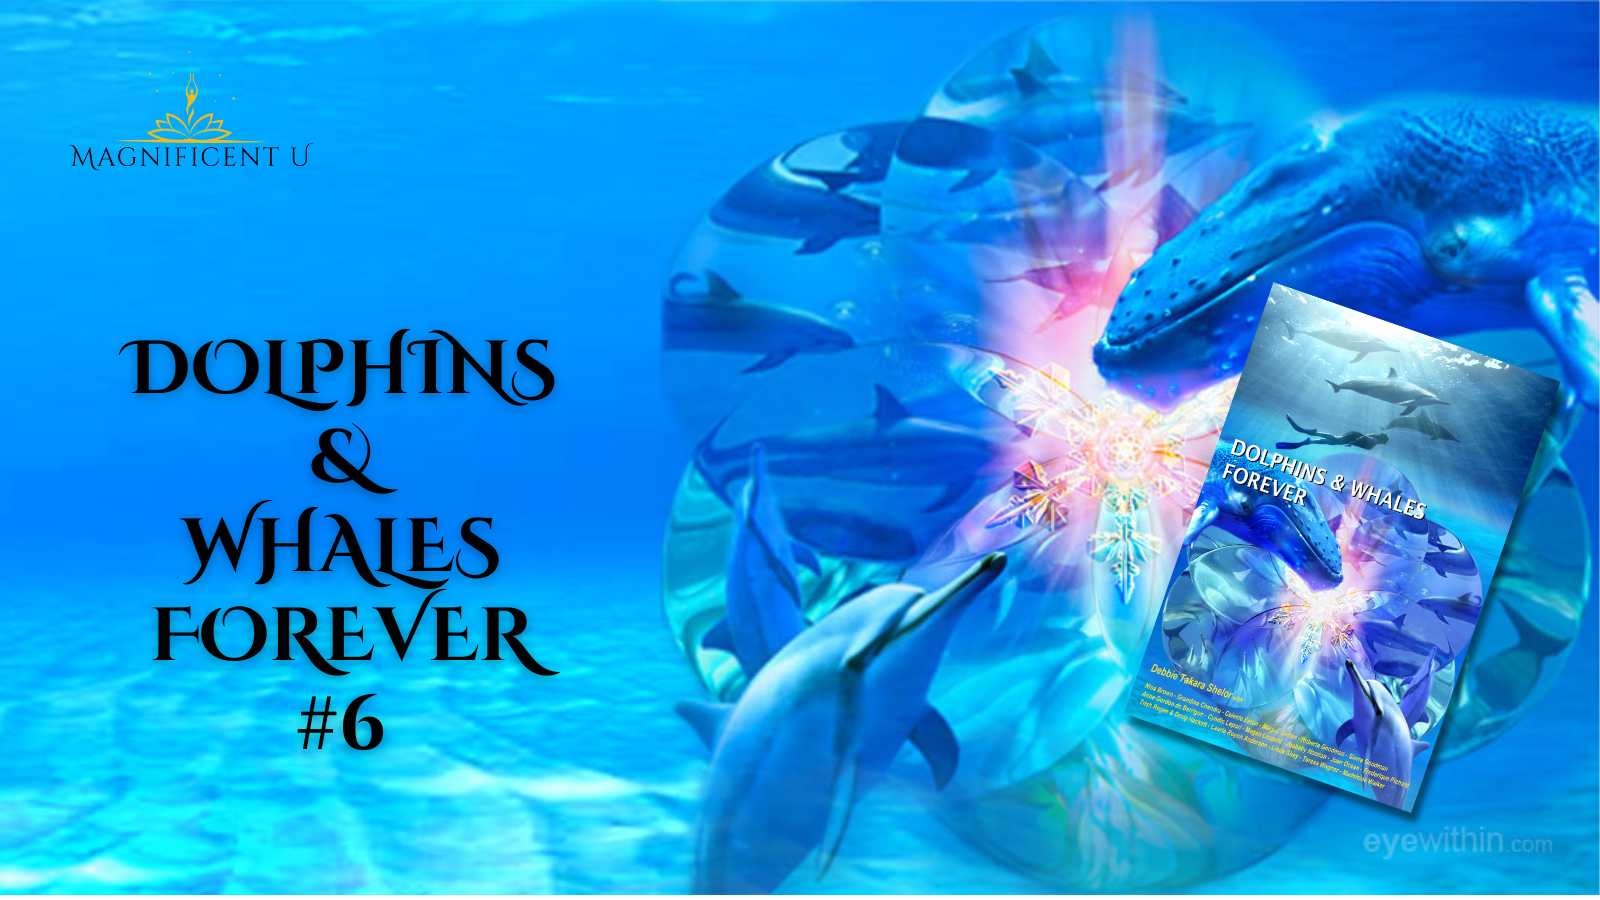 Dolphins & Whales Forever bestselling book tour day 6